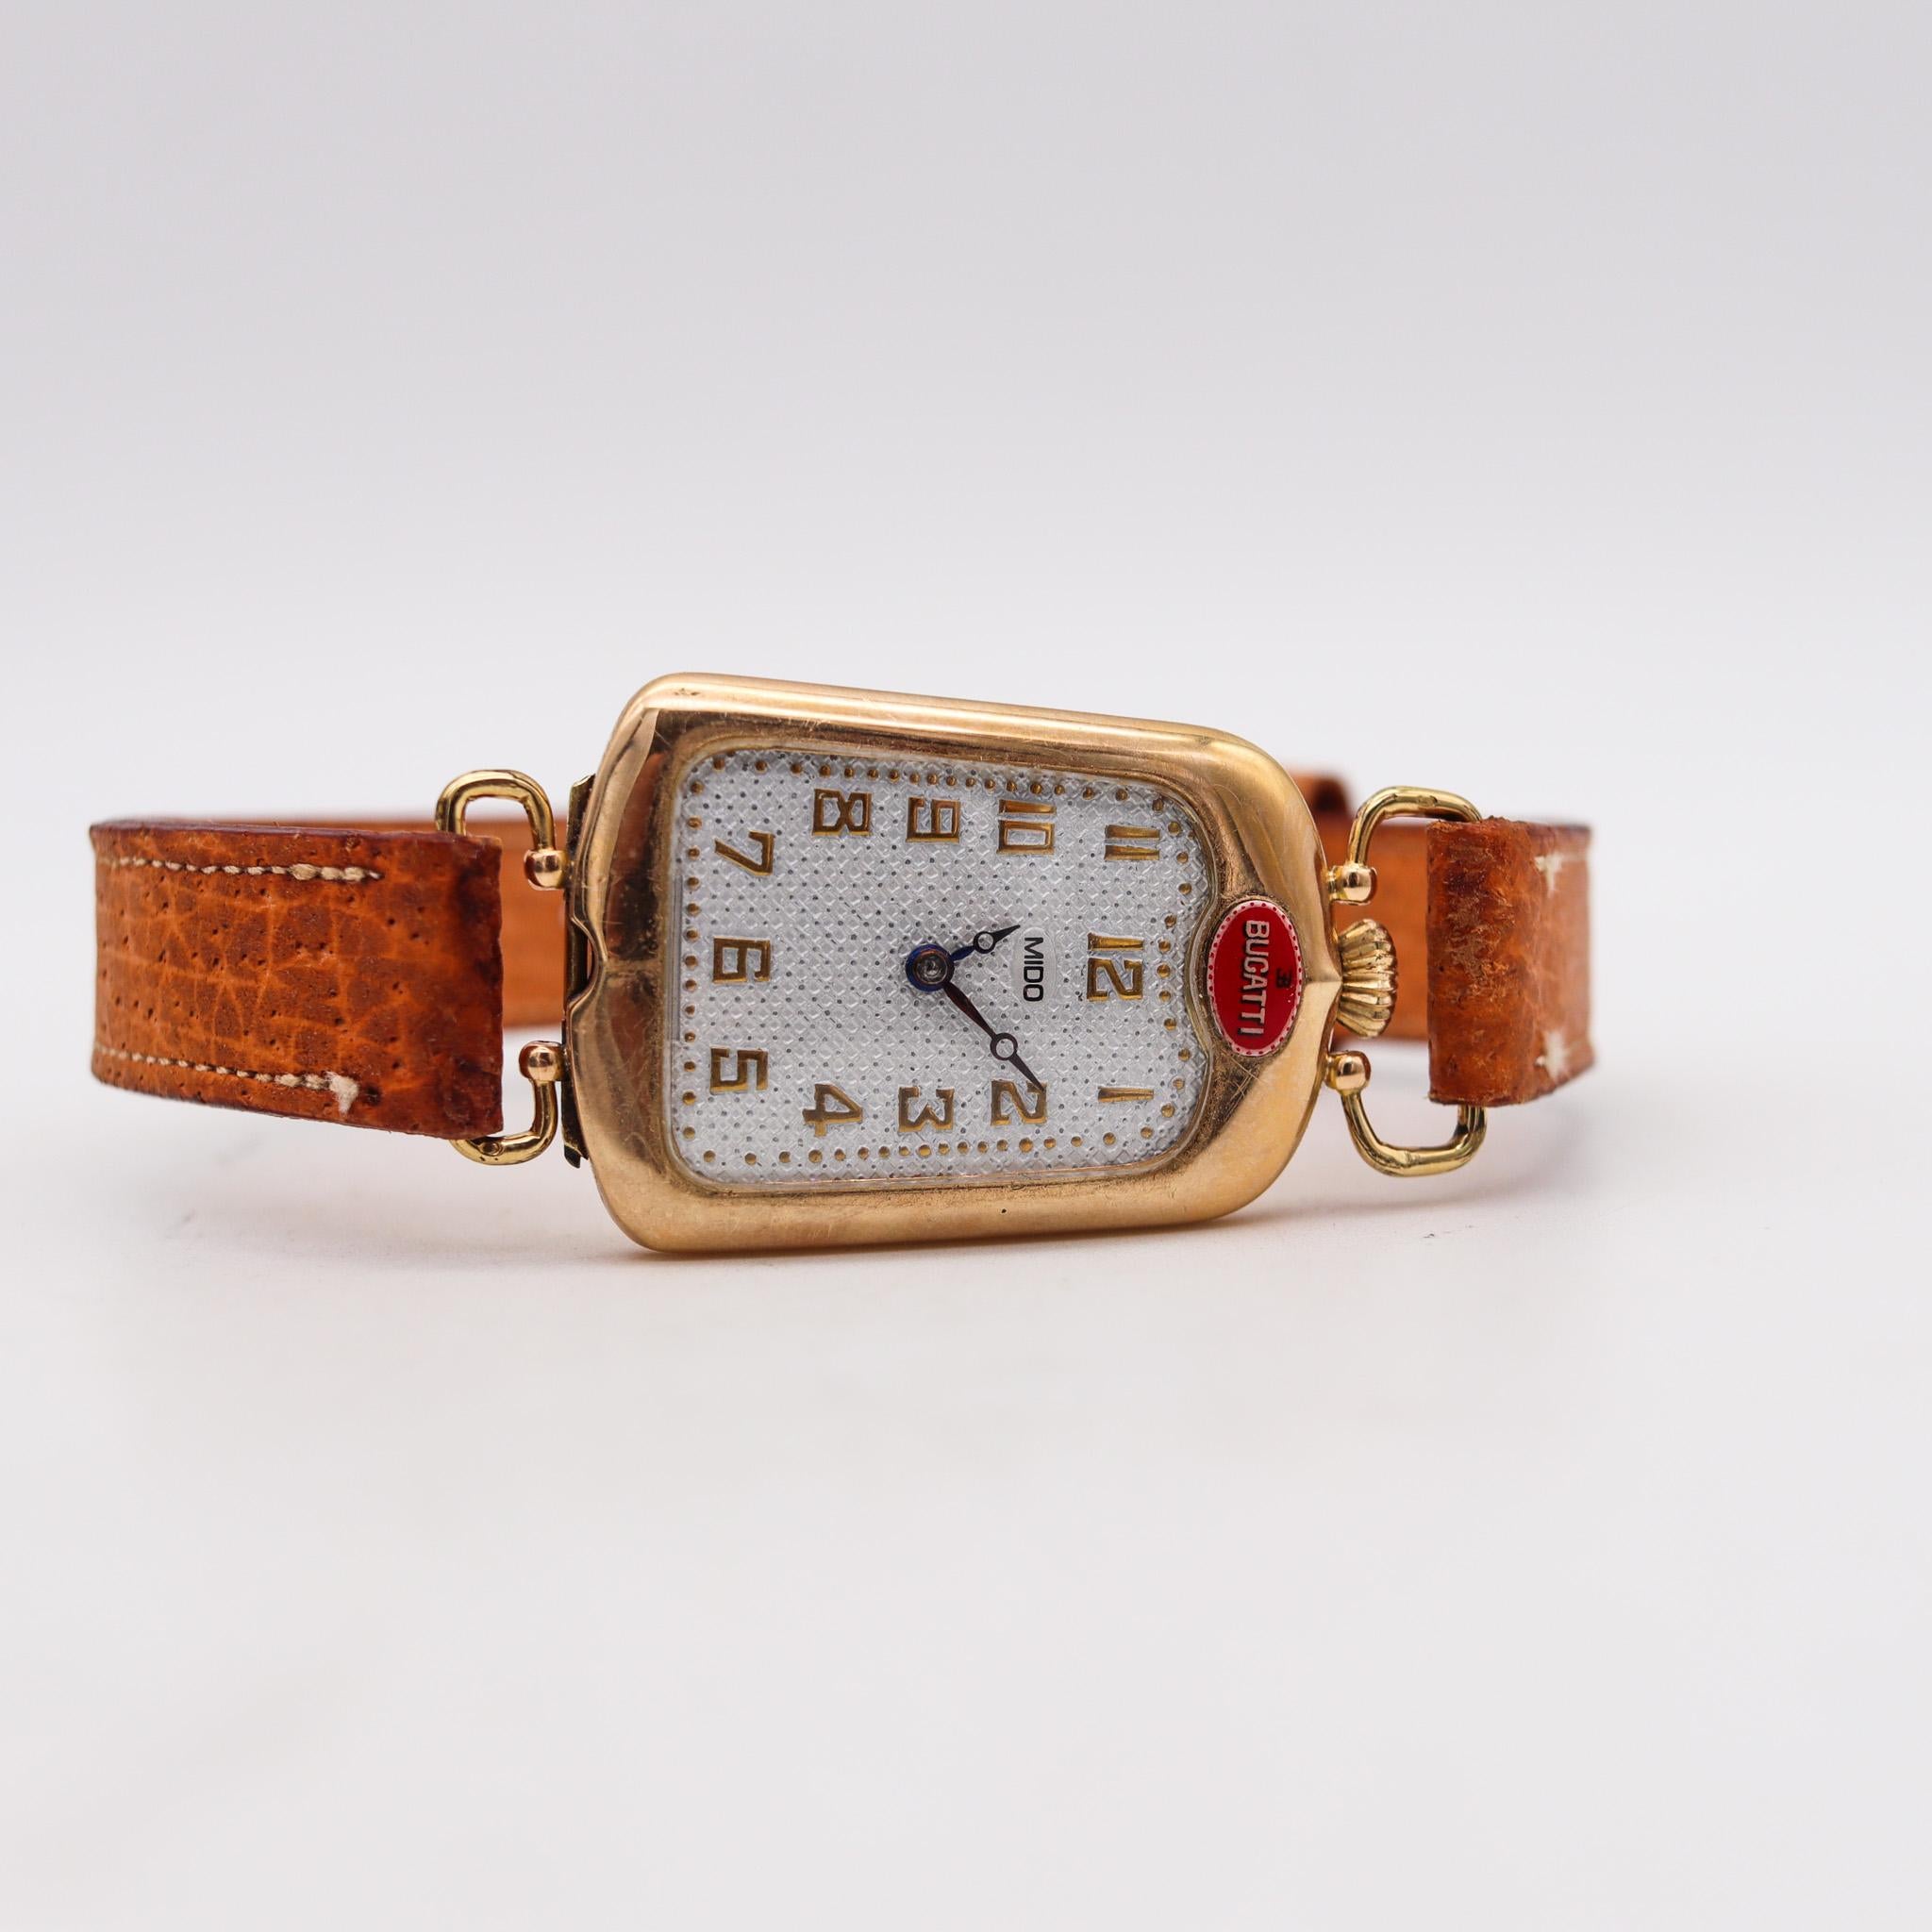 Radiator wrist watch designed by Bugatti.

An extremely rare and unusual deco wristwatch, created in Switzerland by Mido for the Bugatti company. Made during the art deco period in the shape of a automobile radiator grill, back in the 1930. Crafted